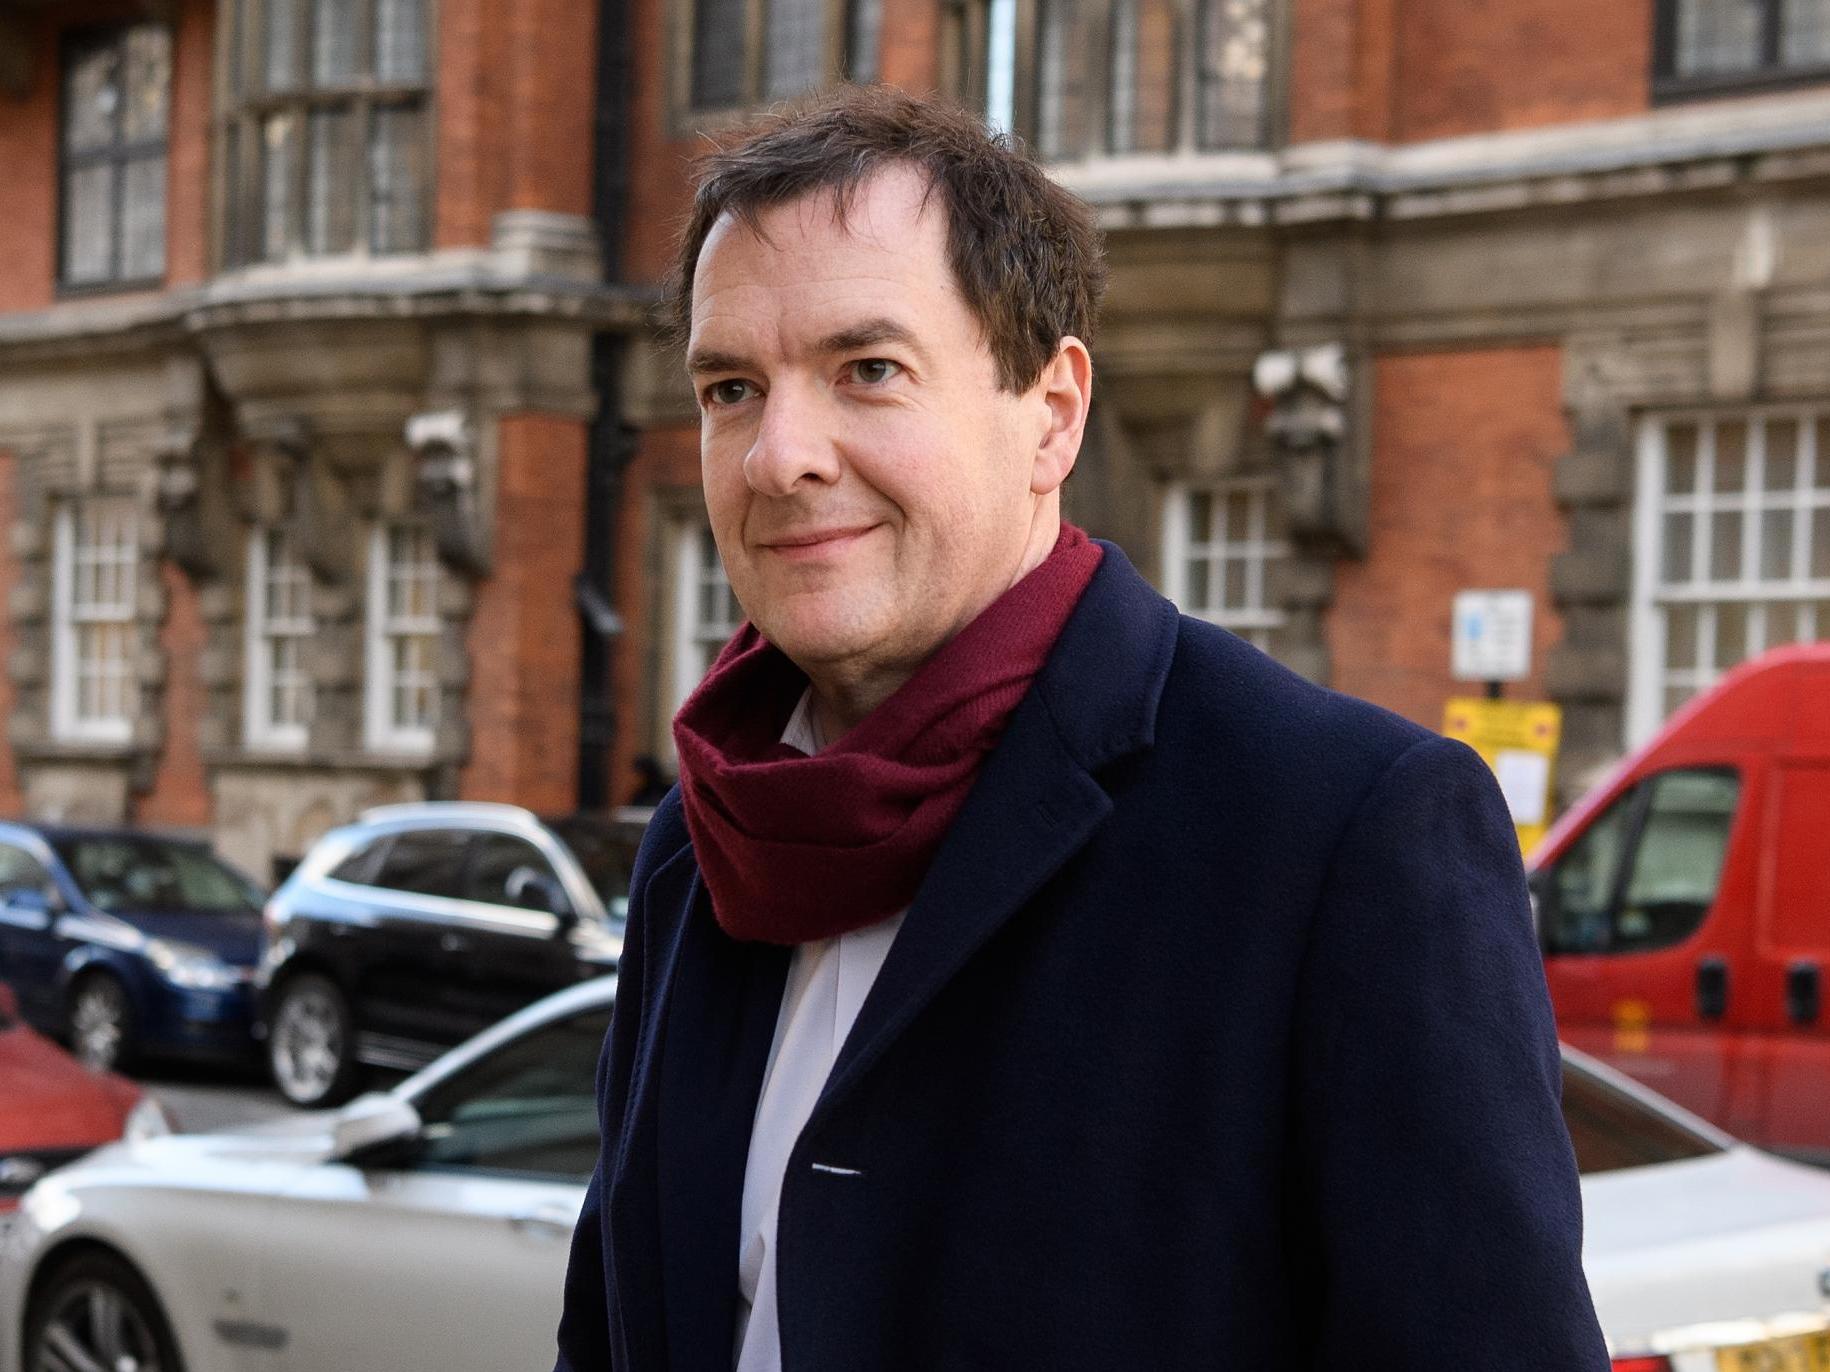 George Osborne is to move to a new role in the Evening Standard after three years as editor